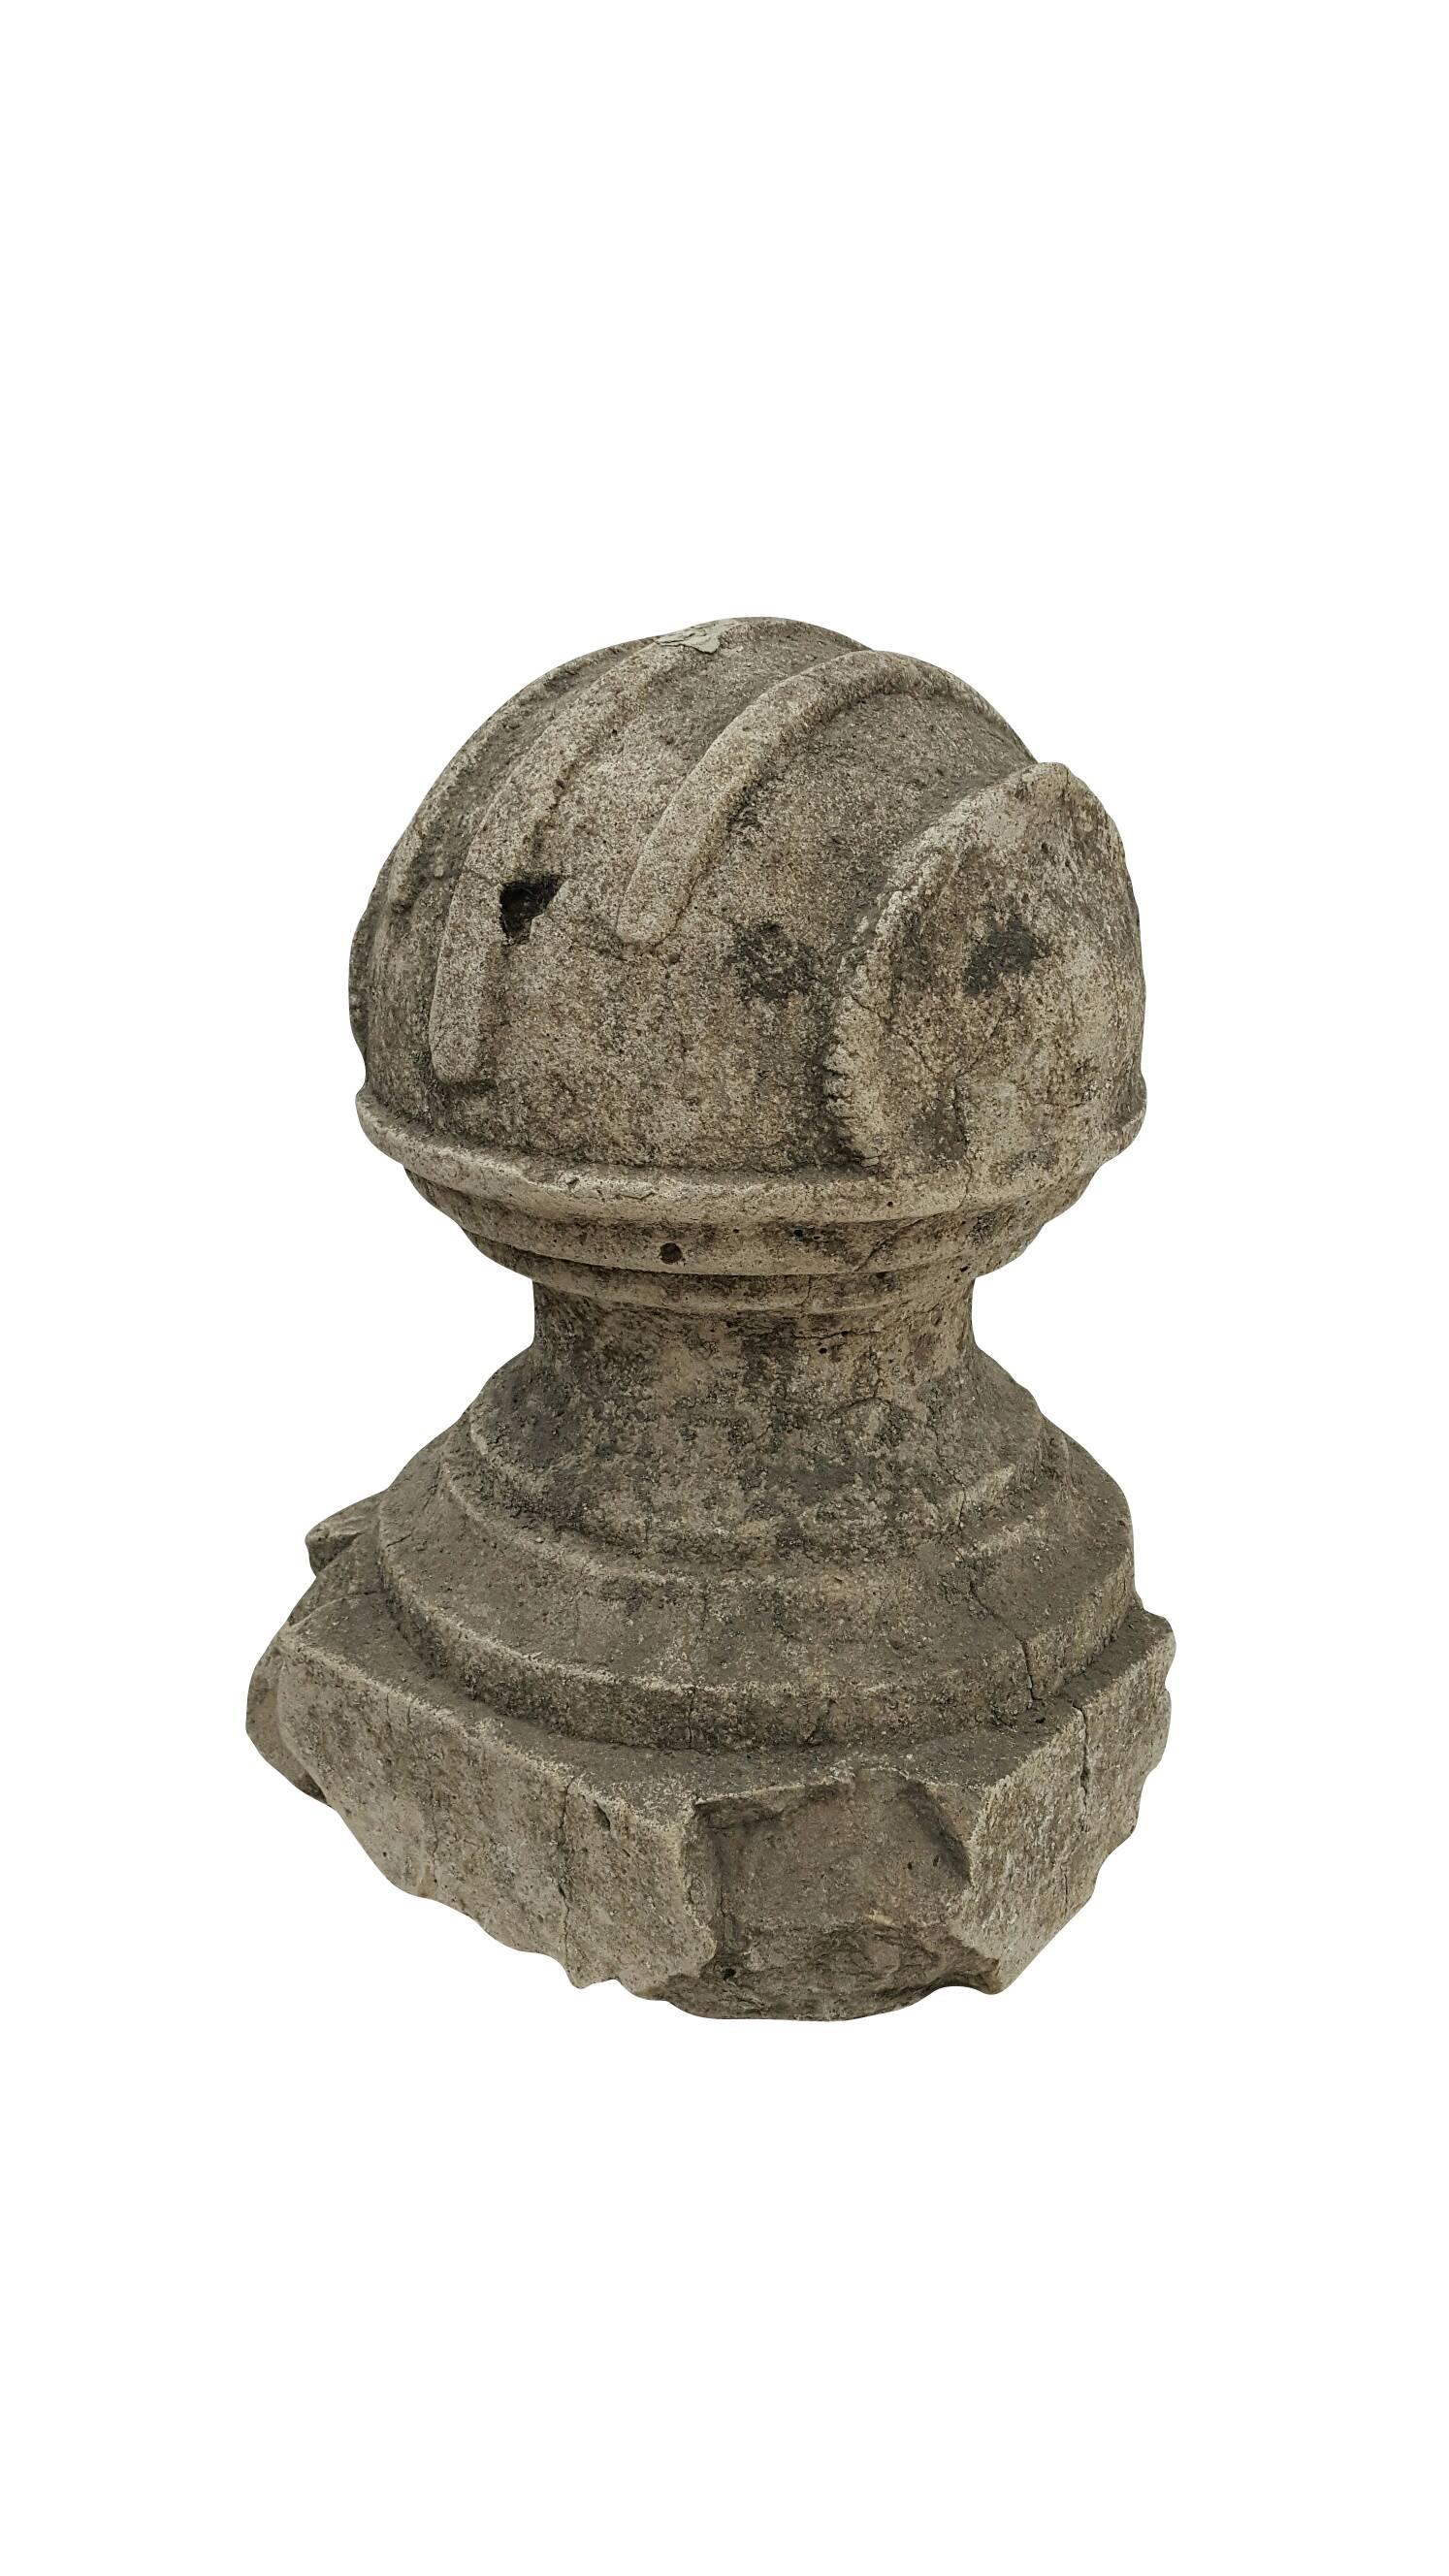 Beautiful 19th century column fragment ball stone sculpture
stand sold separately.